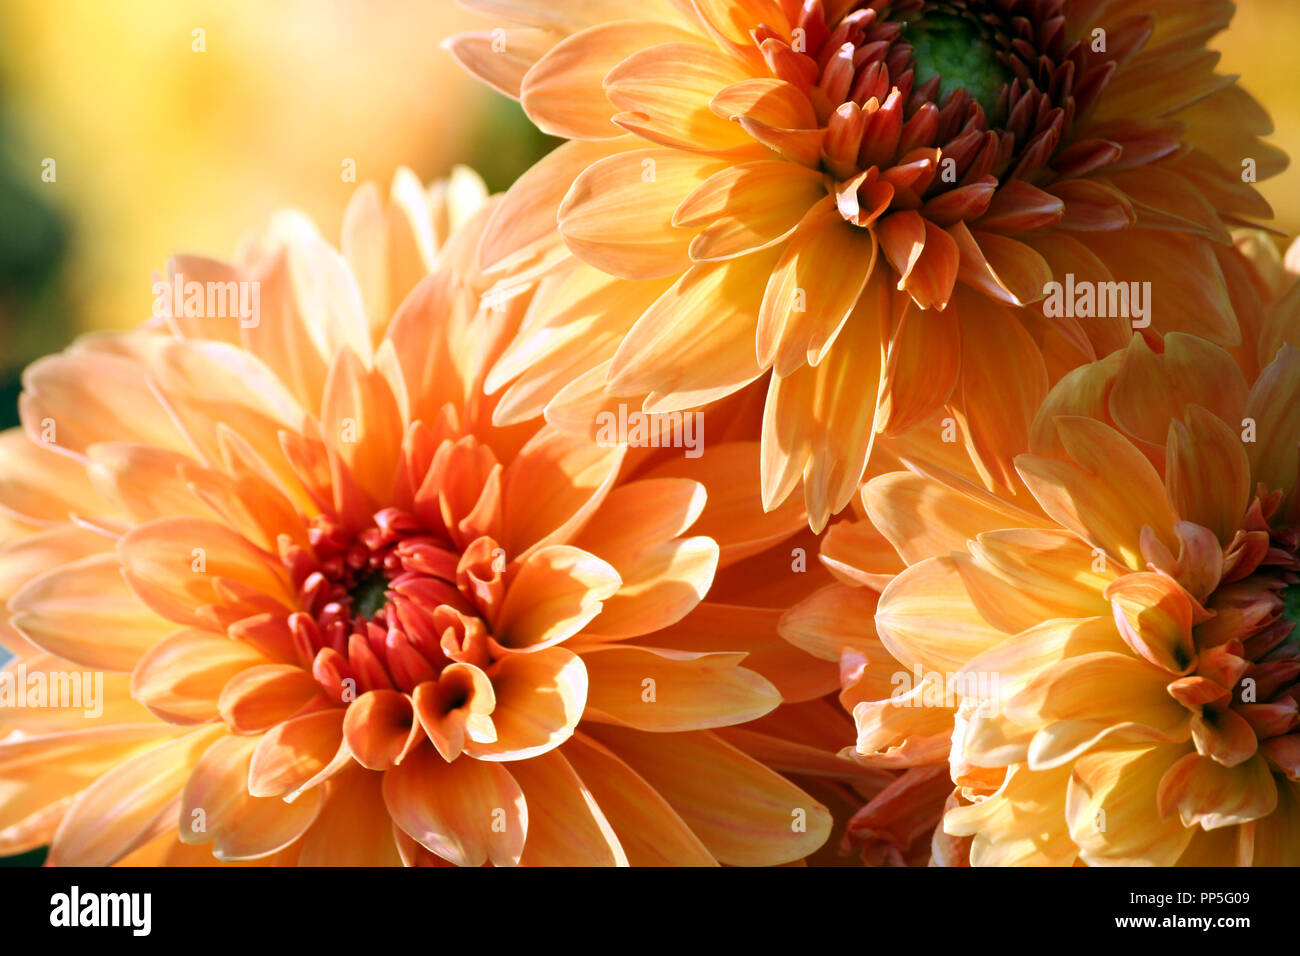 variety  of chrysanthemum kids stuff asteraceae plant, three large orange flowers in parts, the core is red, sunny autumn day, close-up, lit by sun Stock Photo